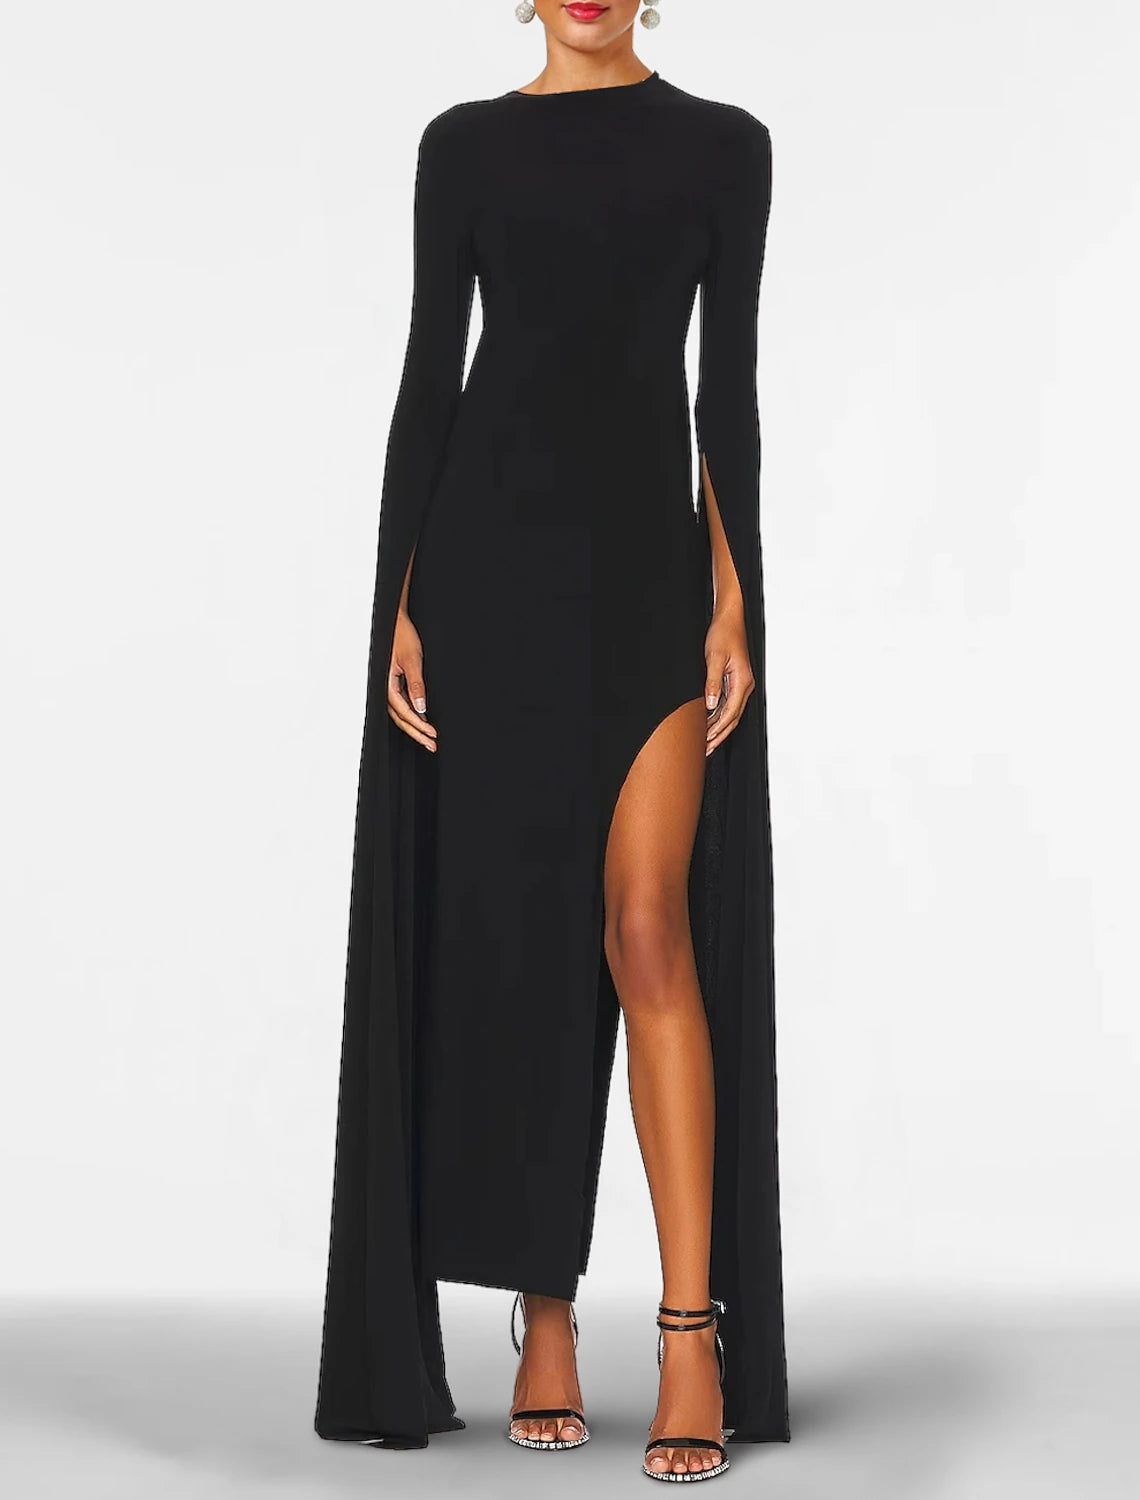 Sheath Black Dress Plus Size Evening Gown Open Back Dress Formal Wedding Guest Floor Length Long Sleeve Jewel Neck Capes Stretch Chiffon with Shawl 2024